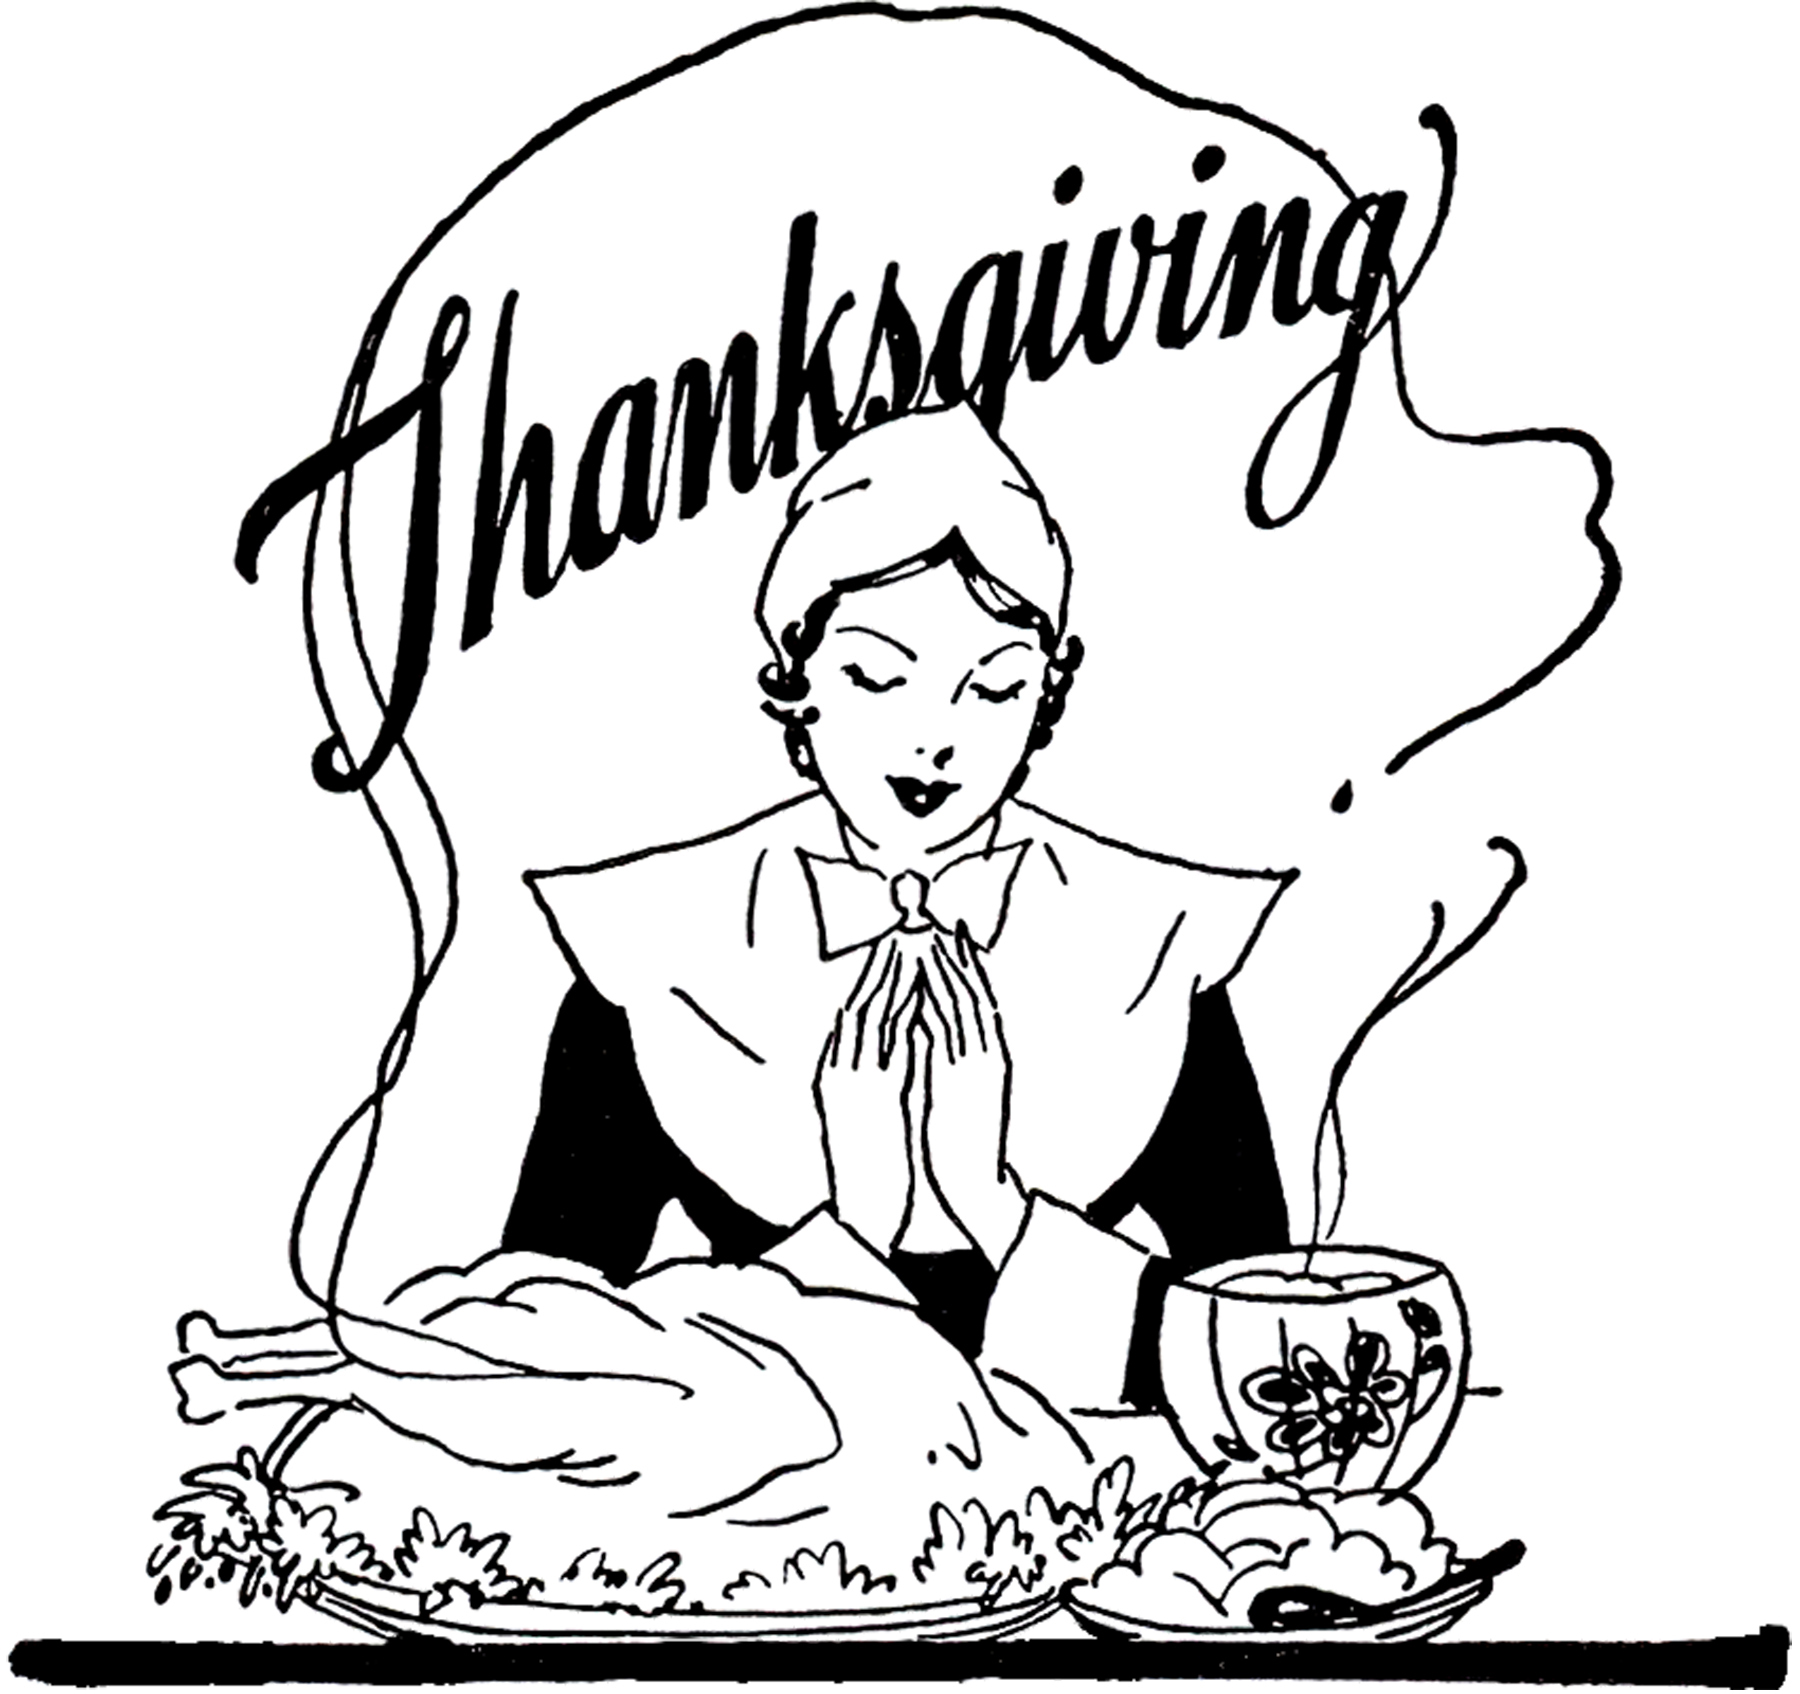 Thanksgiving Grace Image! - The Graphics Fairy